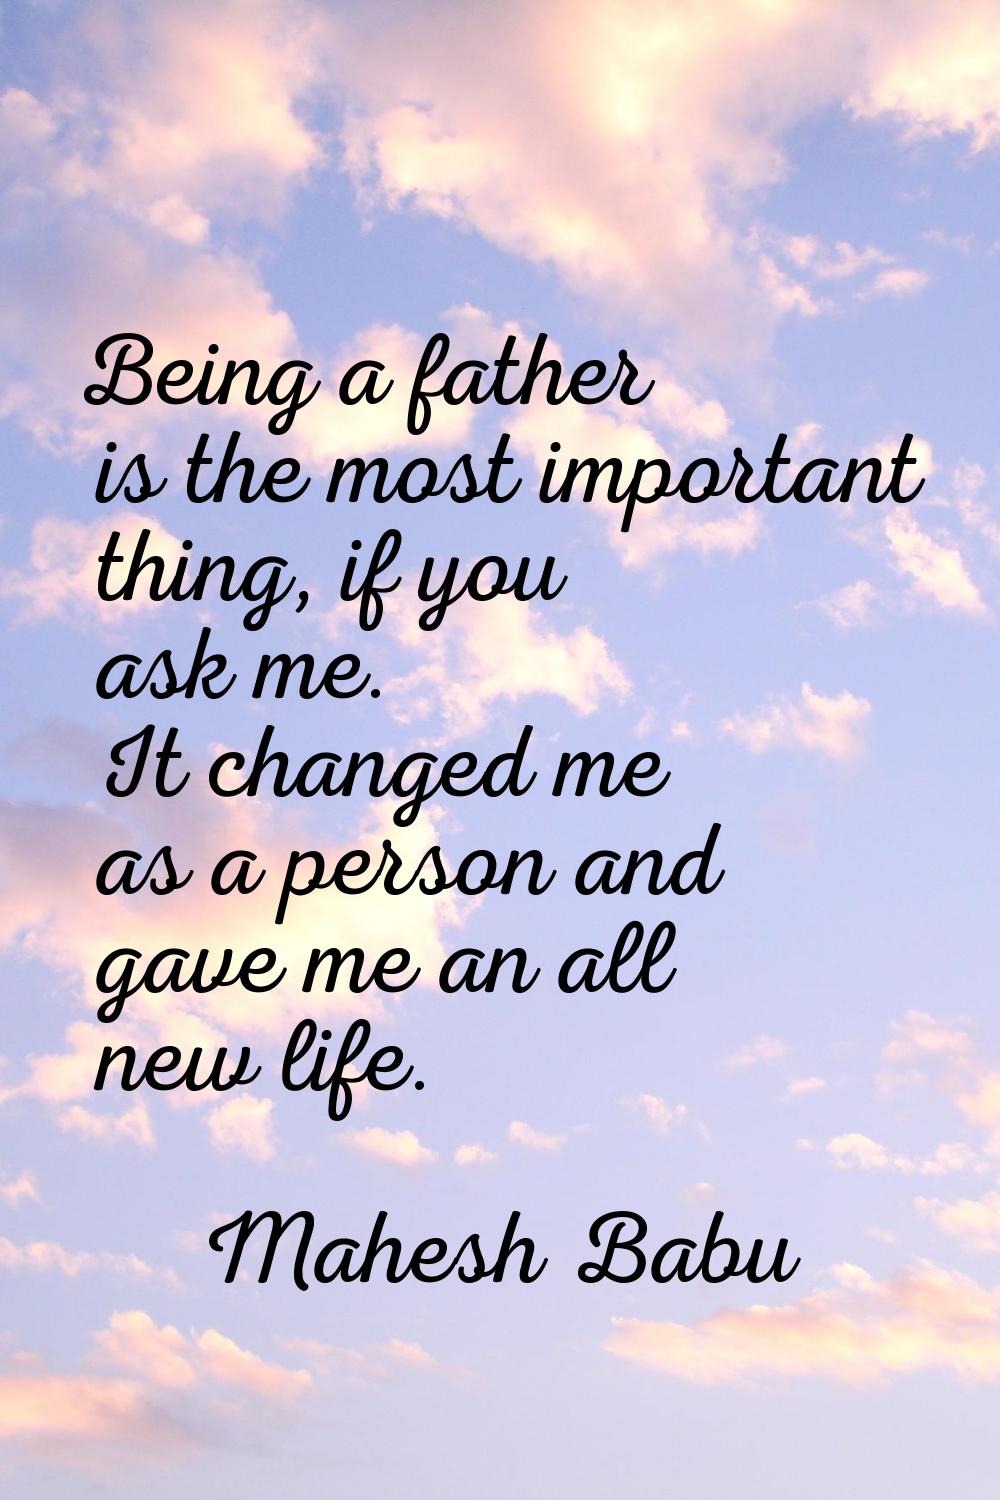 Being a father is the most important thing, if you ask me. It changed me as a person and gave me an